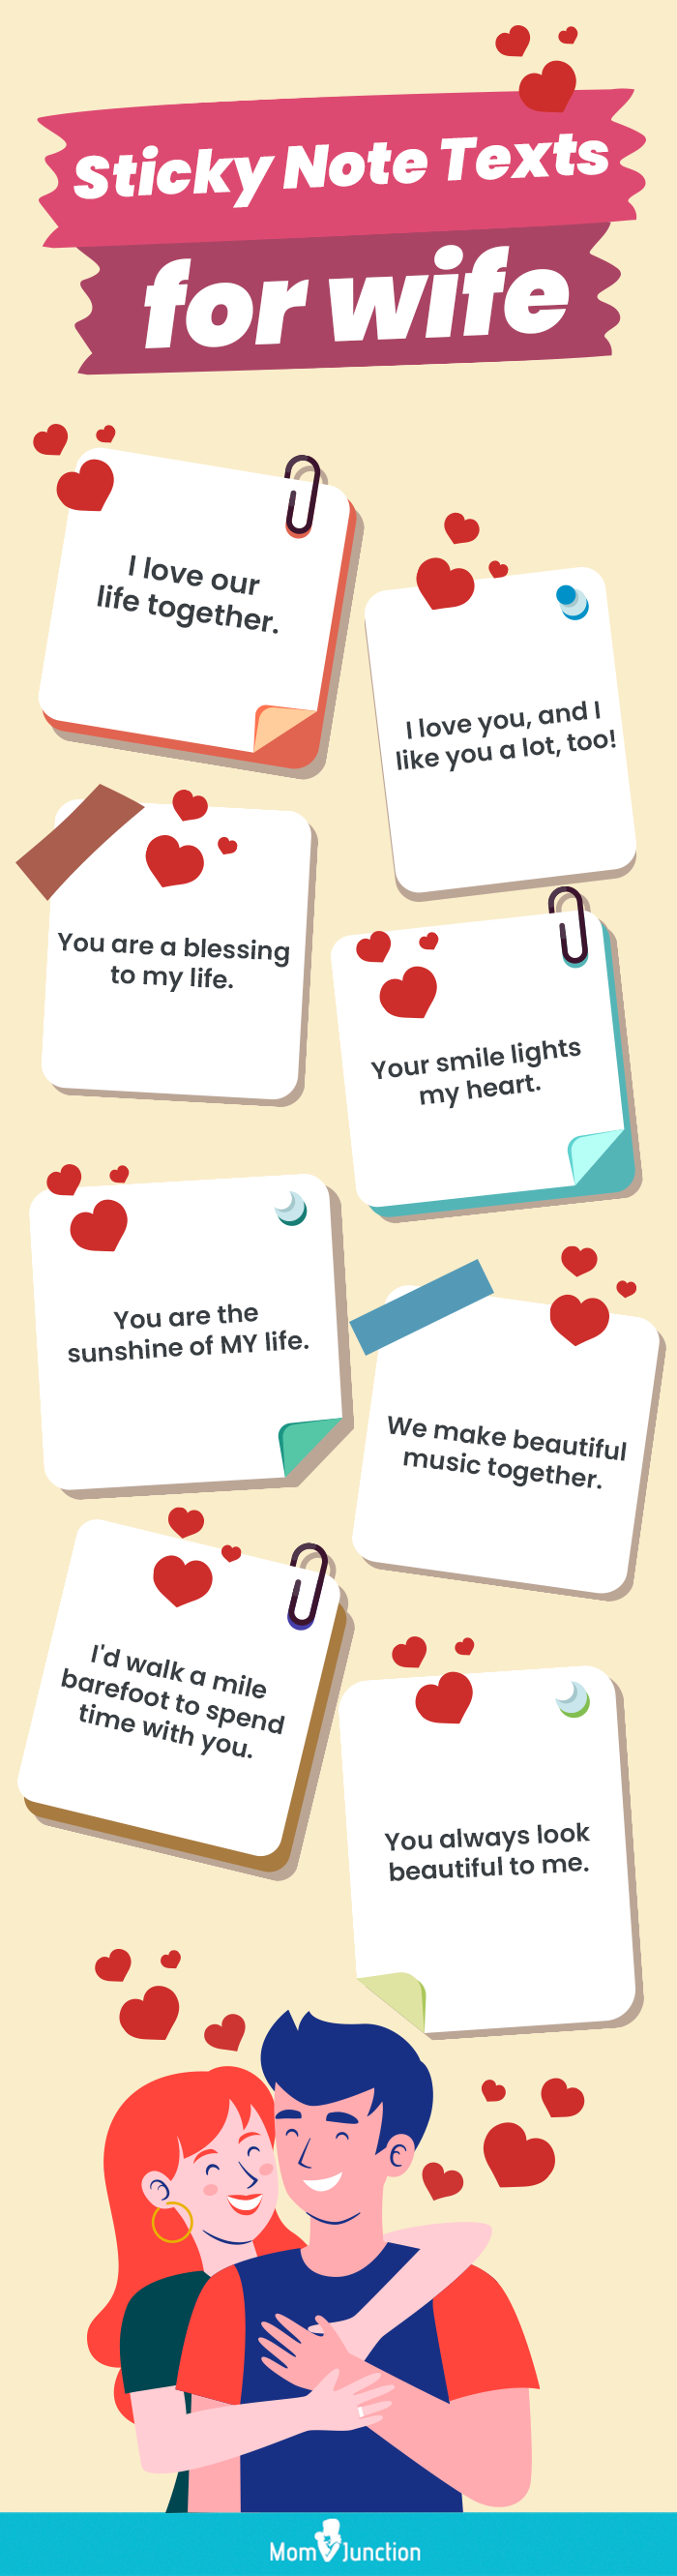 sticky note texts for wife (infographic)